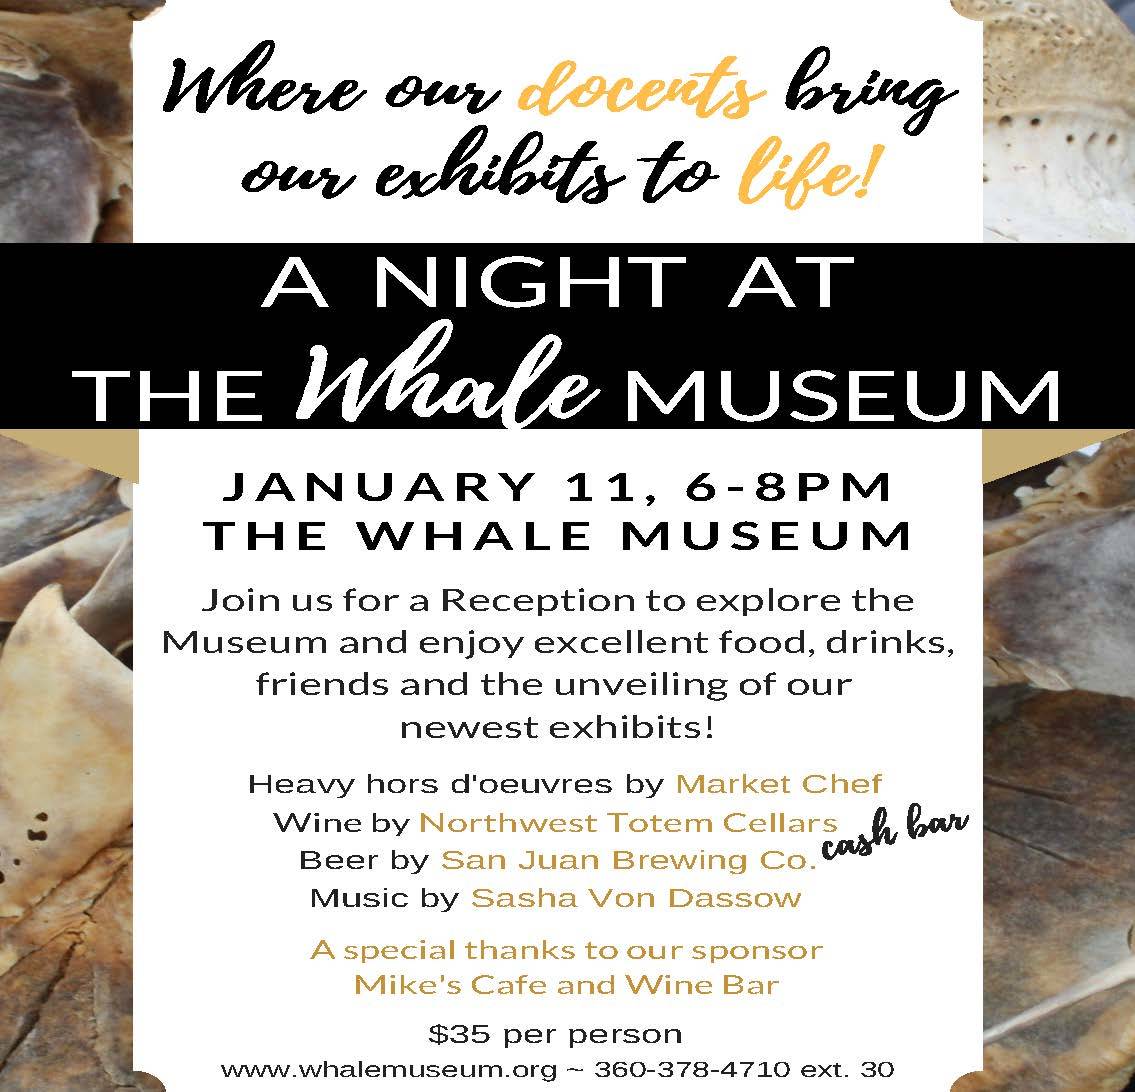 Support The Whale Museum and view new exhibits